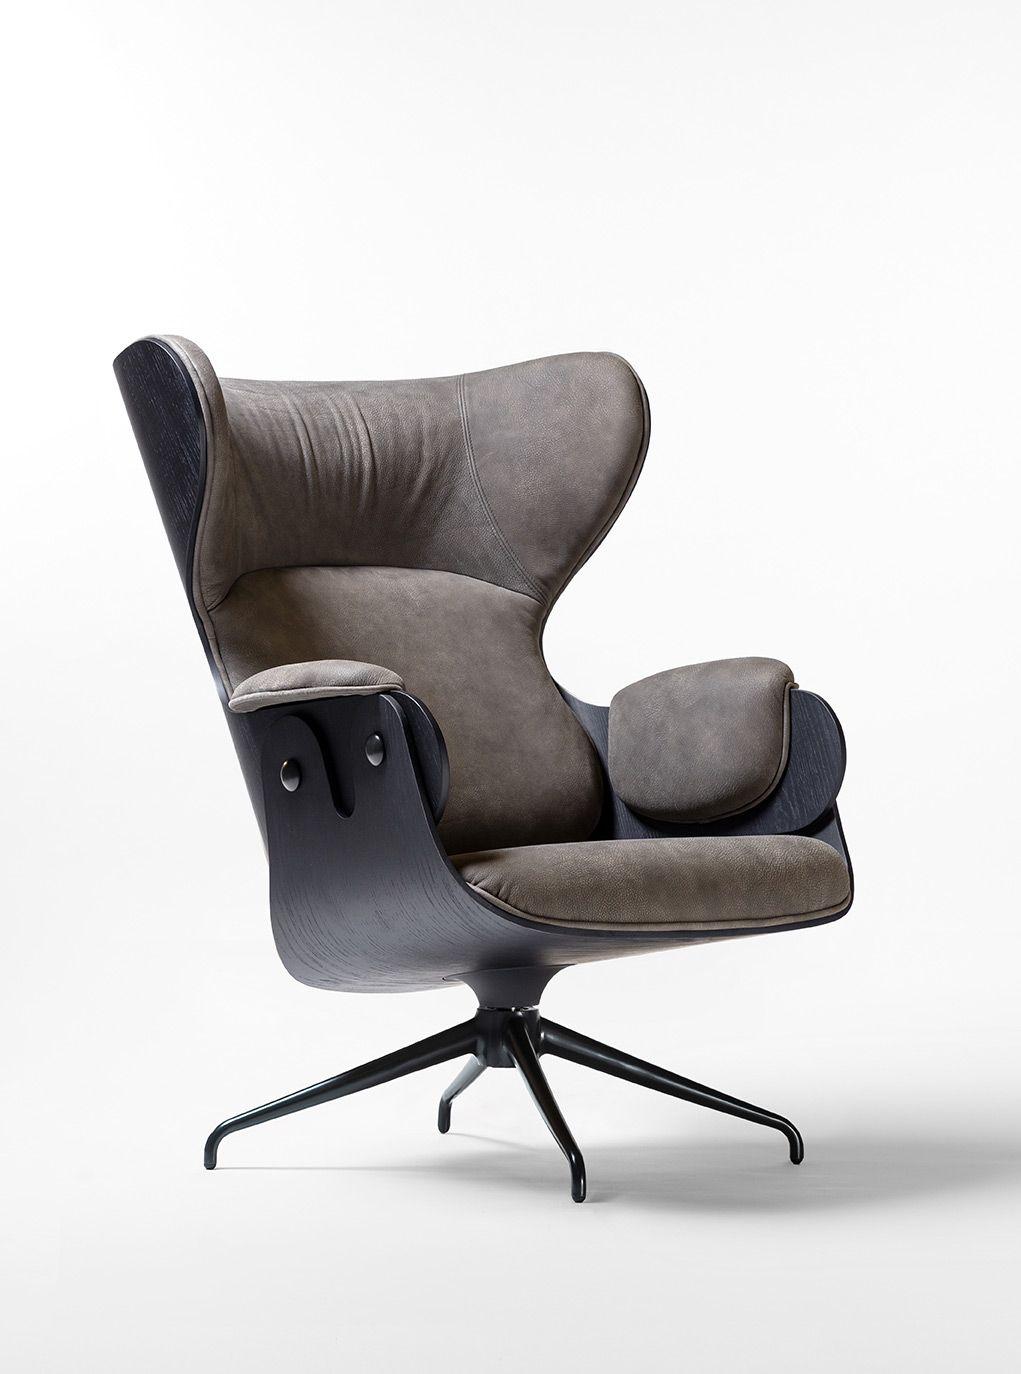 Spanish Lounger Black Armchair by Jaime Hayon For Sale